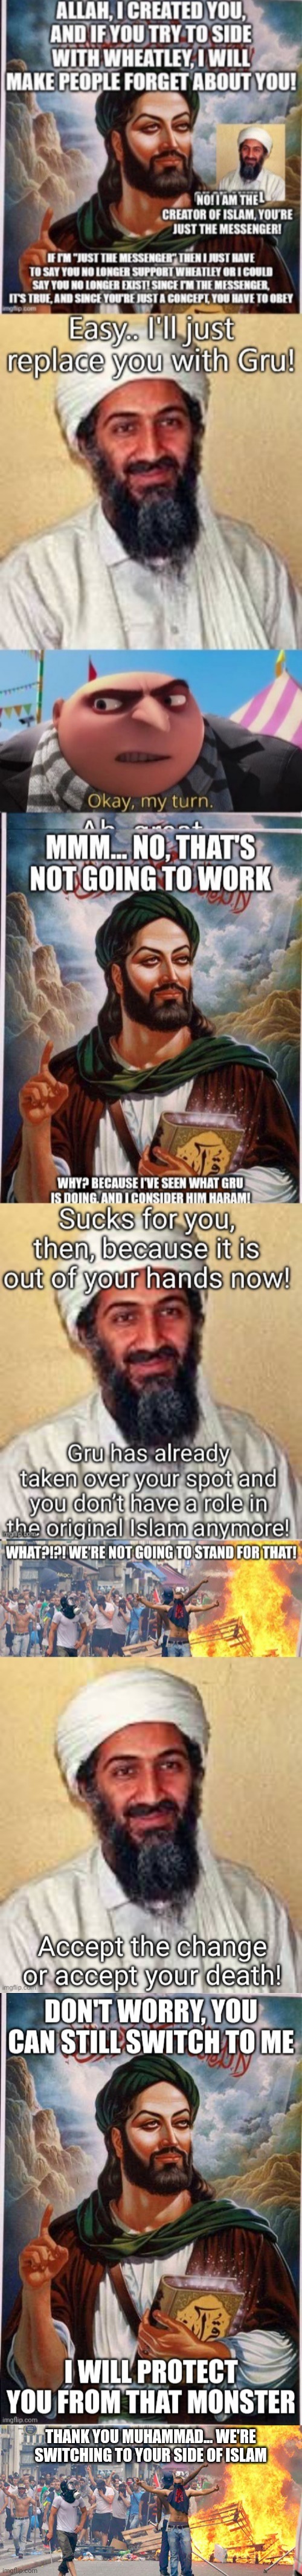 They choose acceptance of Muhammad's new Islam, Allah cannot say otherwise | THANK YOU MUHAMMAD... WE'RE SWITCHING TO YOUR SIDE OF ISLAM | made w/ Imgflip meme maker